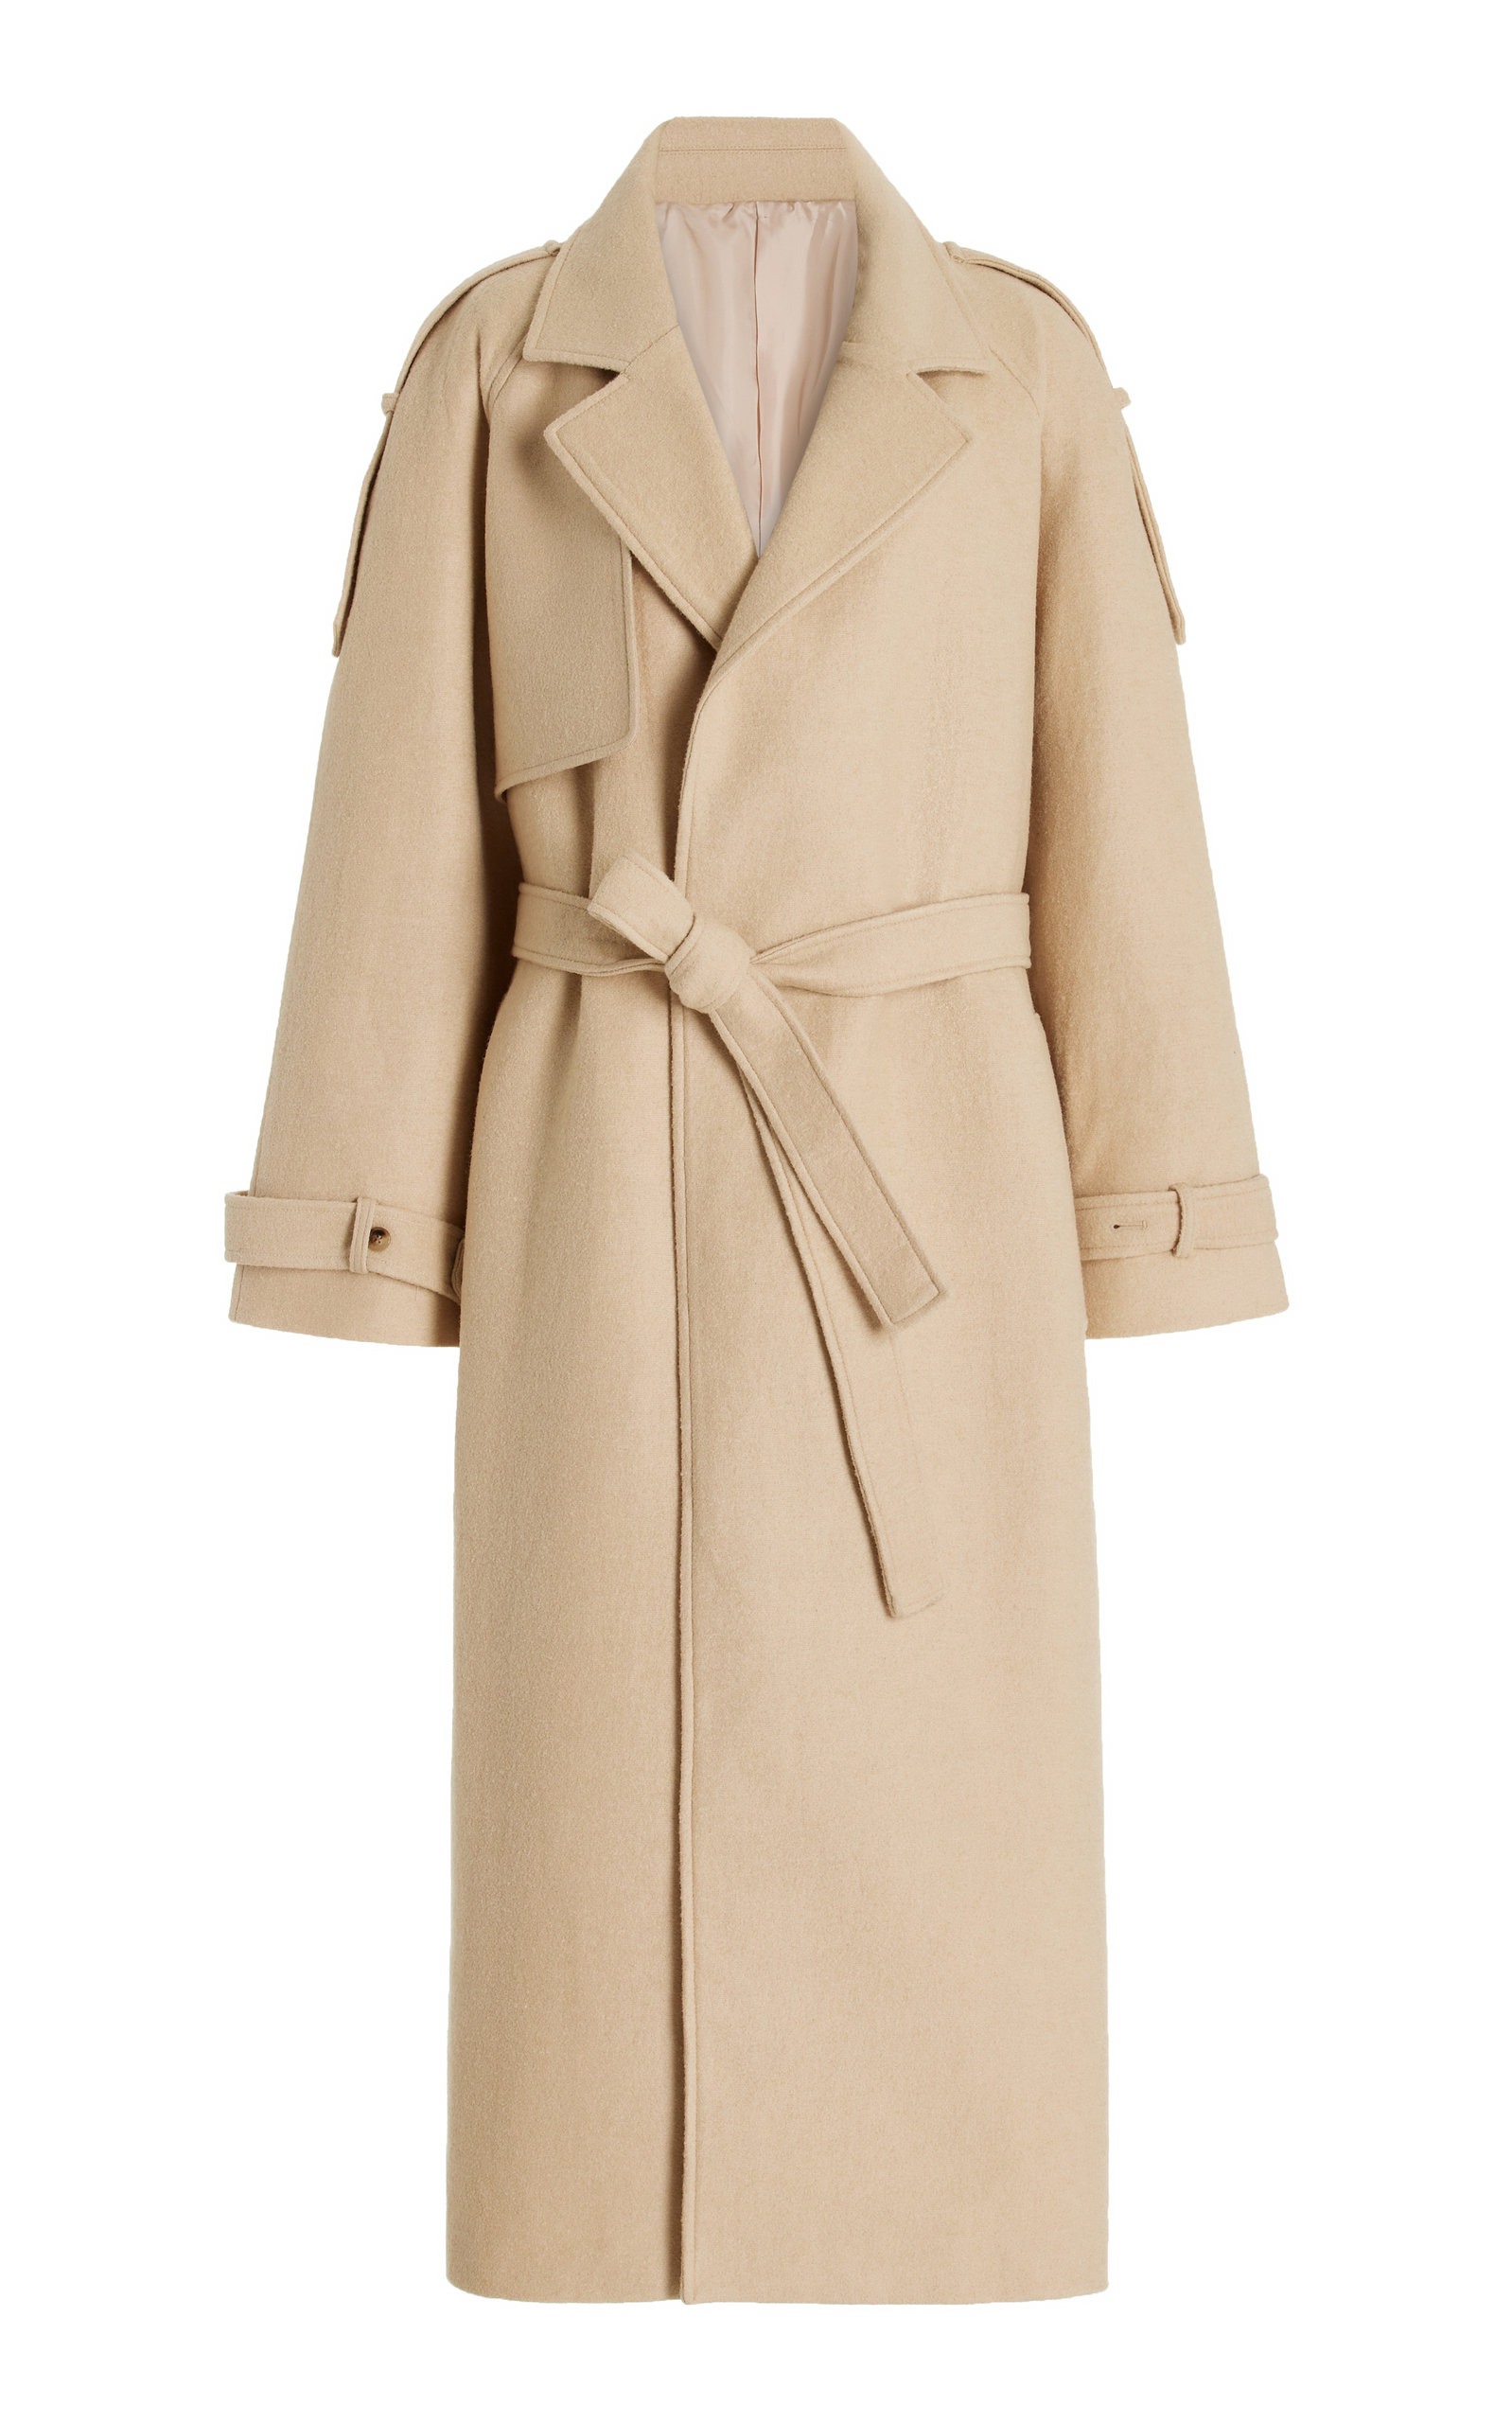 THE FRANKIE SHOP WOMEN'S SUZANNE BOILED WOOL-BLEND TRENCH COAT